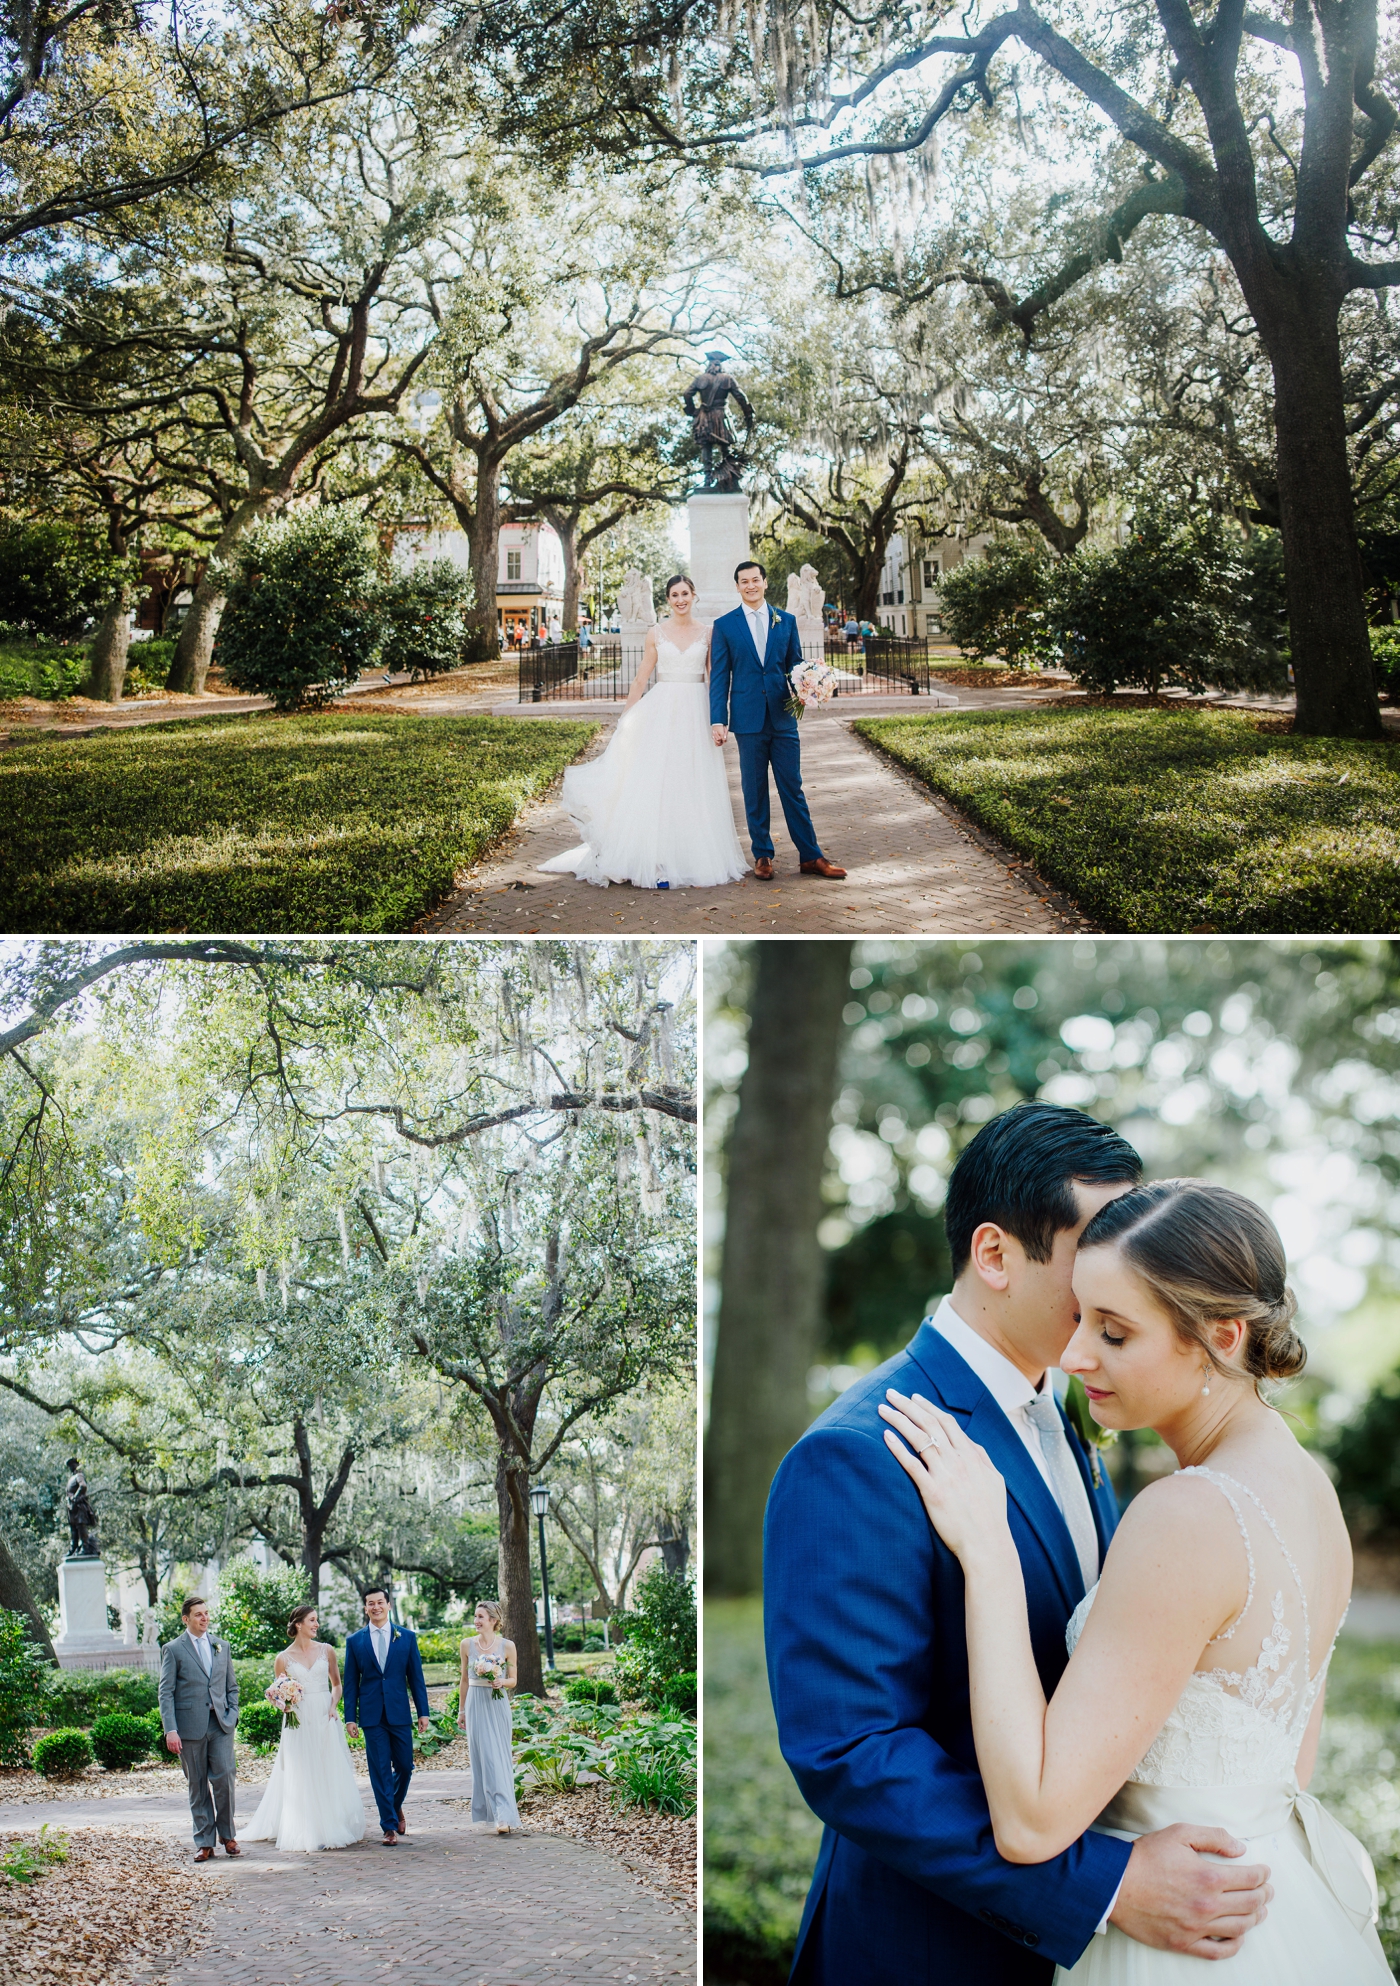 Spring Wedding Ceremony at Forsyth Park | Izzy and Co.